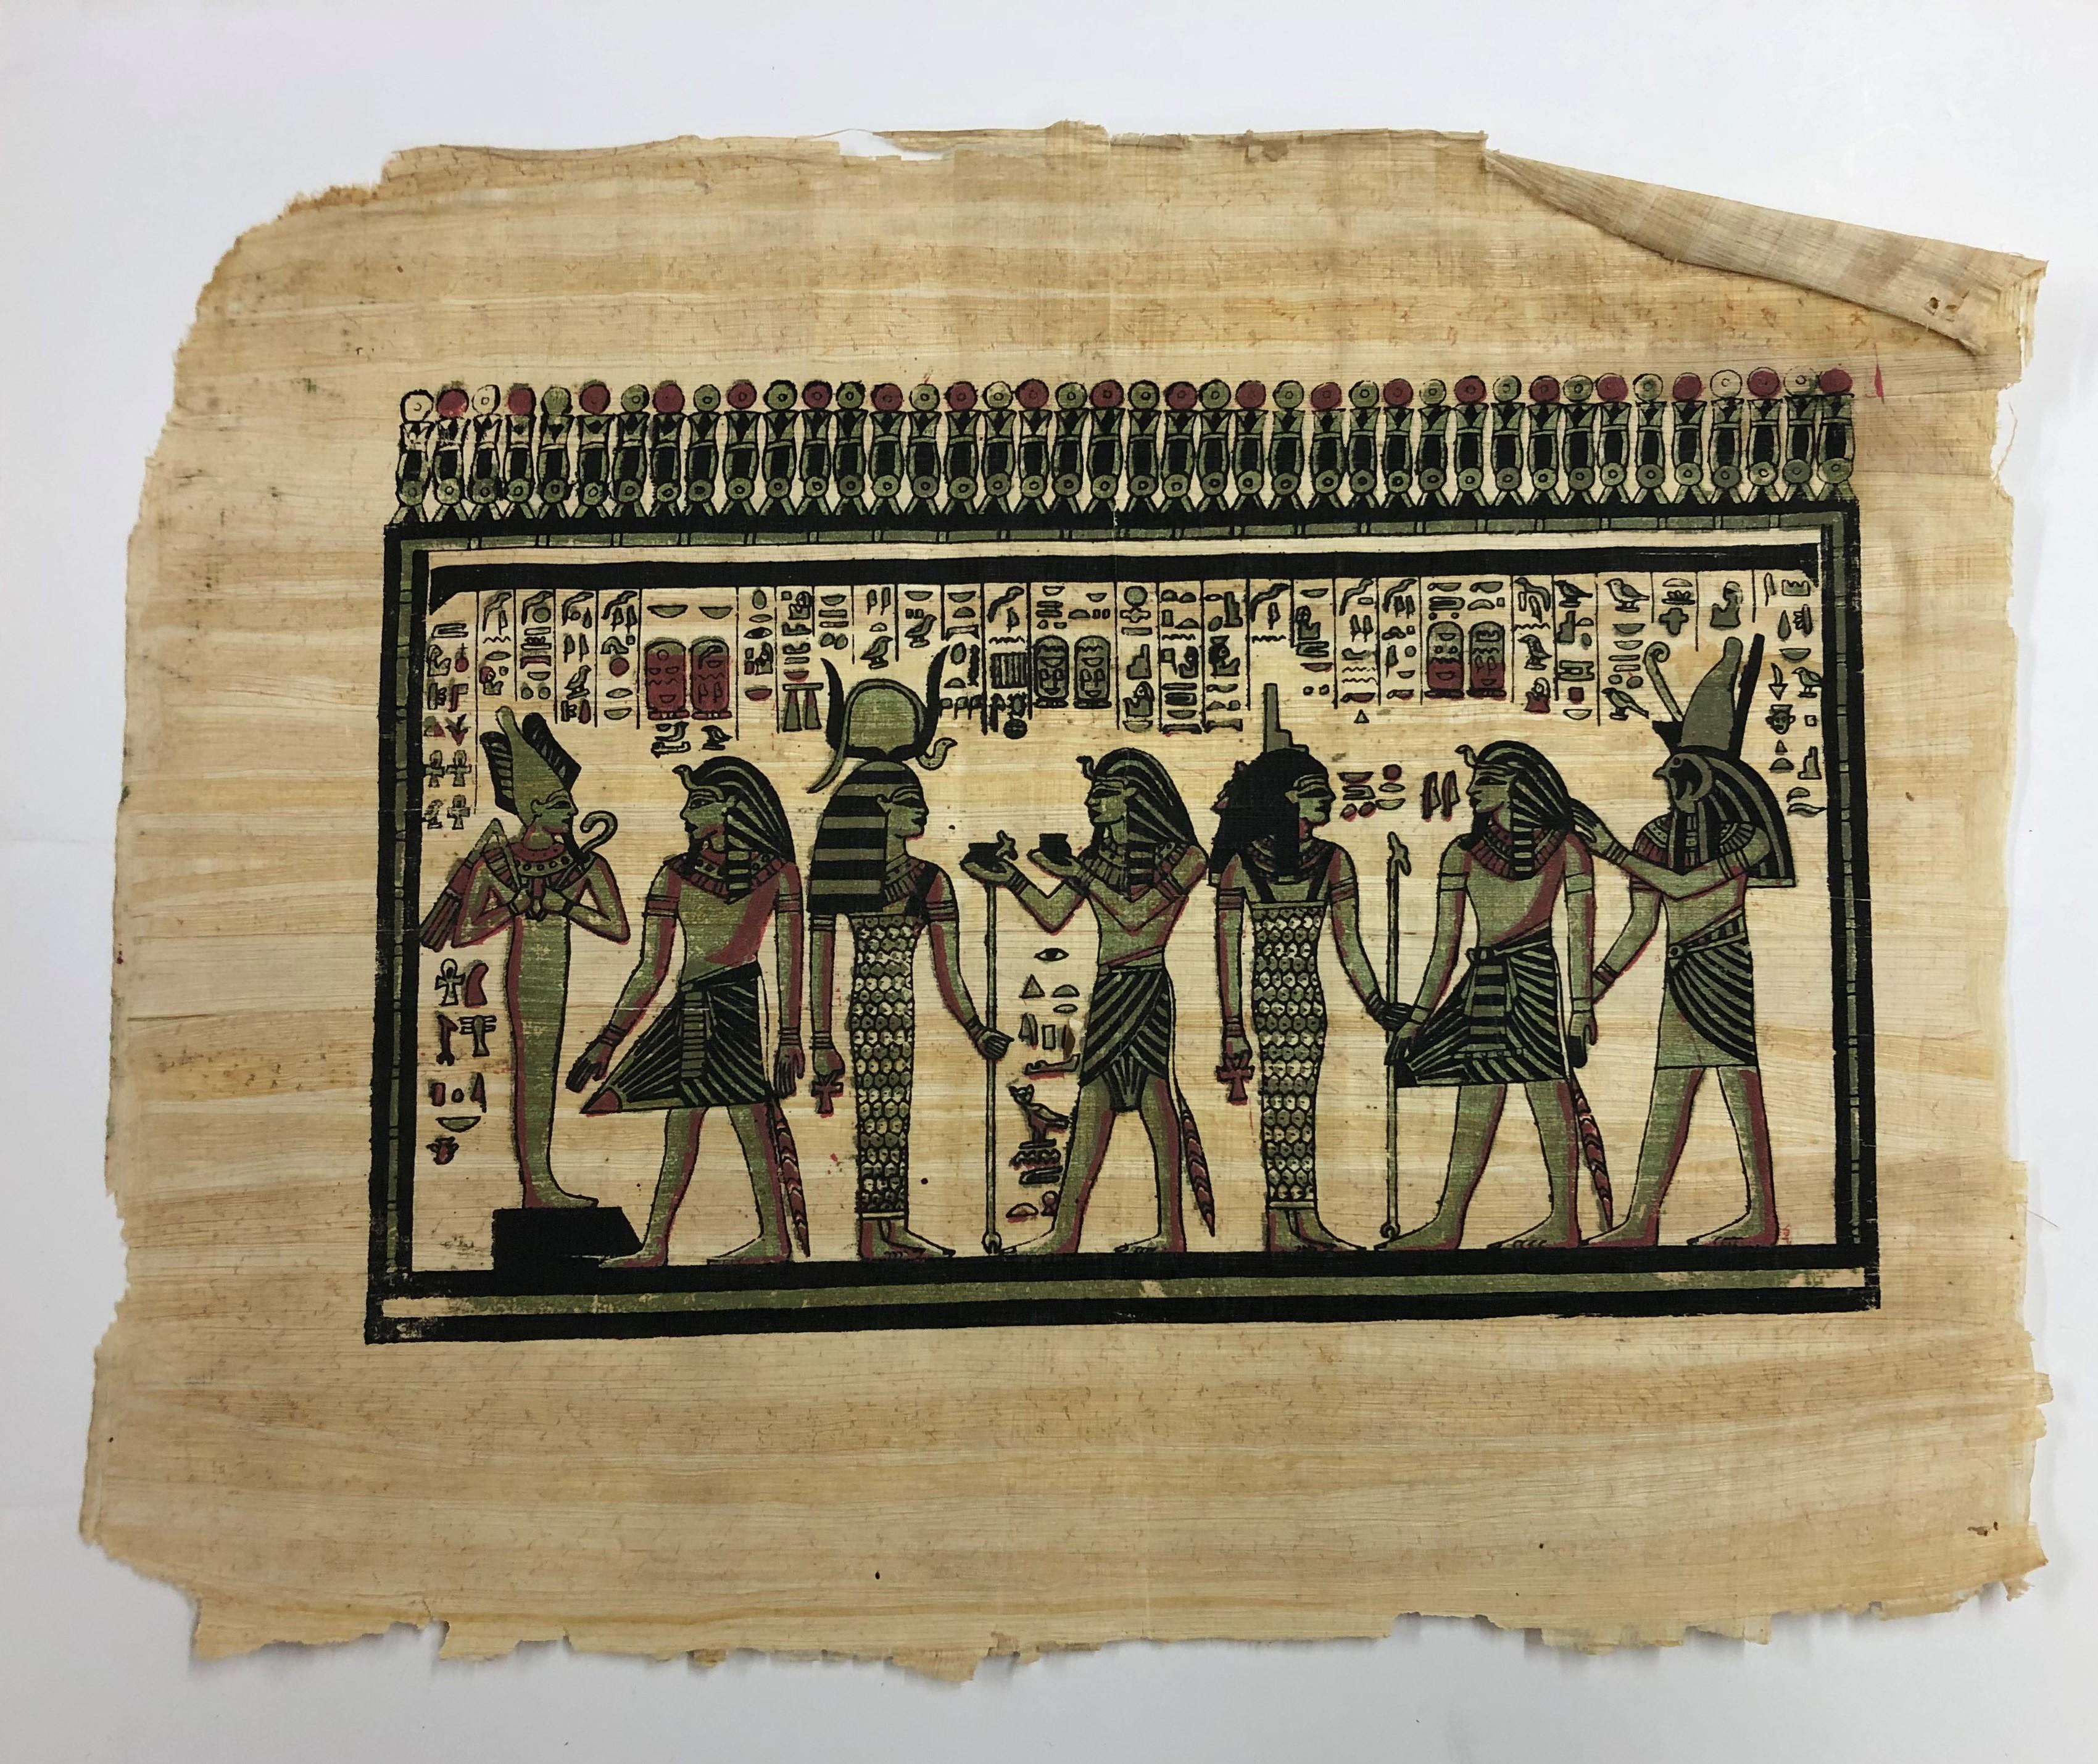  Egyptian Scene II-Painting on Rice Paper - Art by Unknown